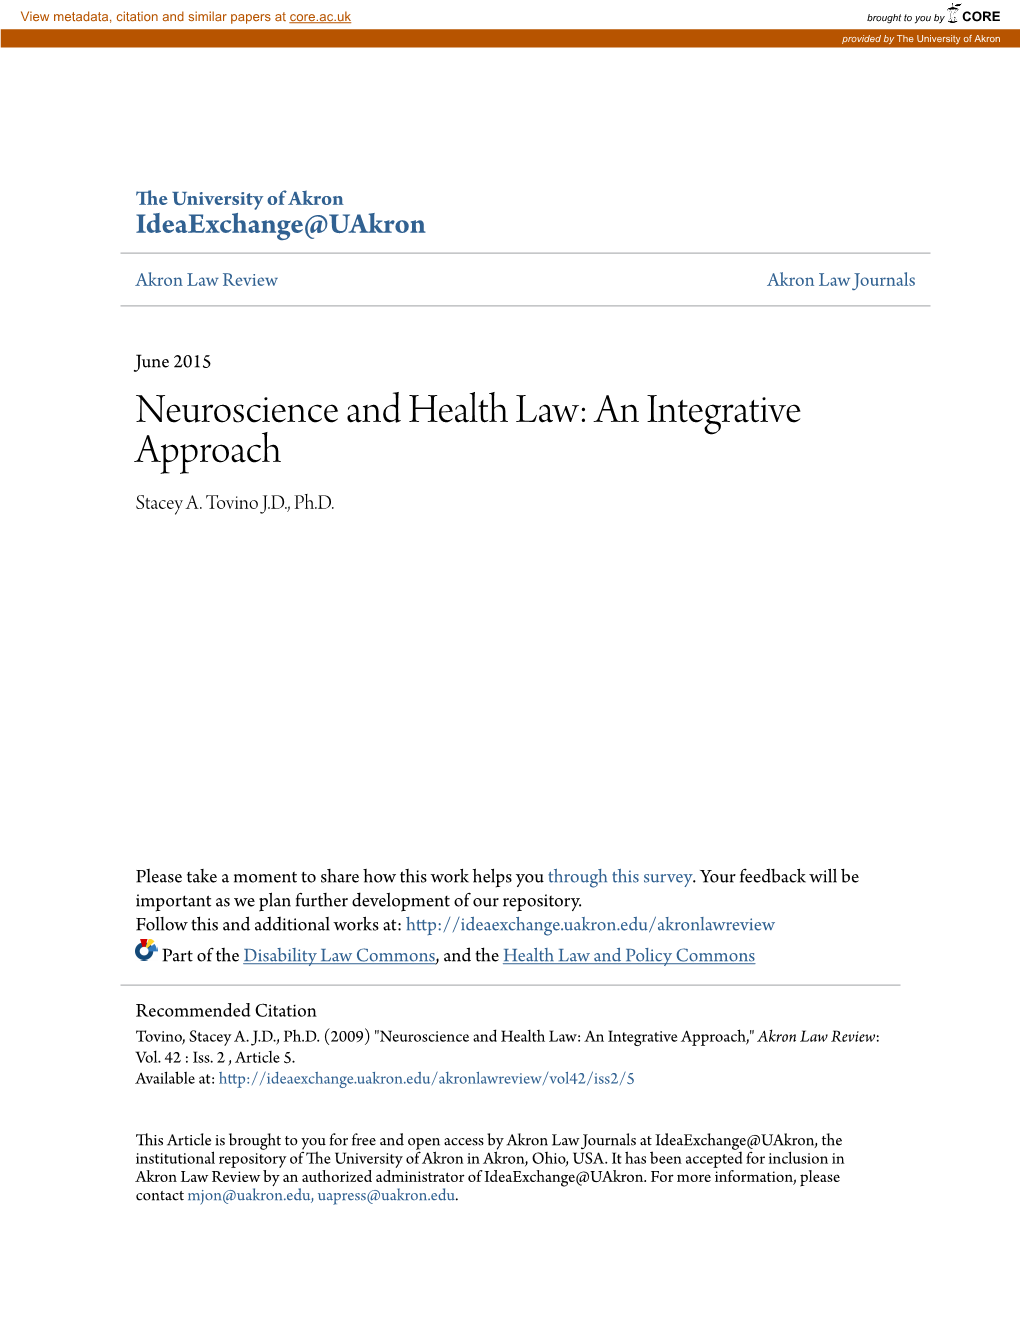 Neuroscience and Health Law: an Integrative Approach Stacey A